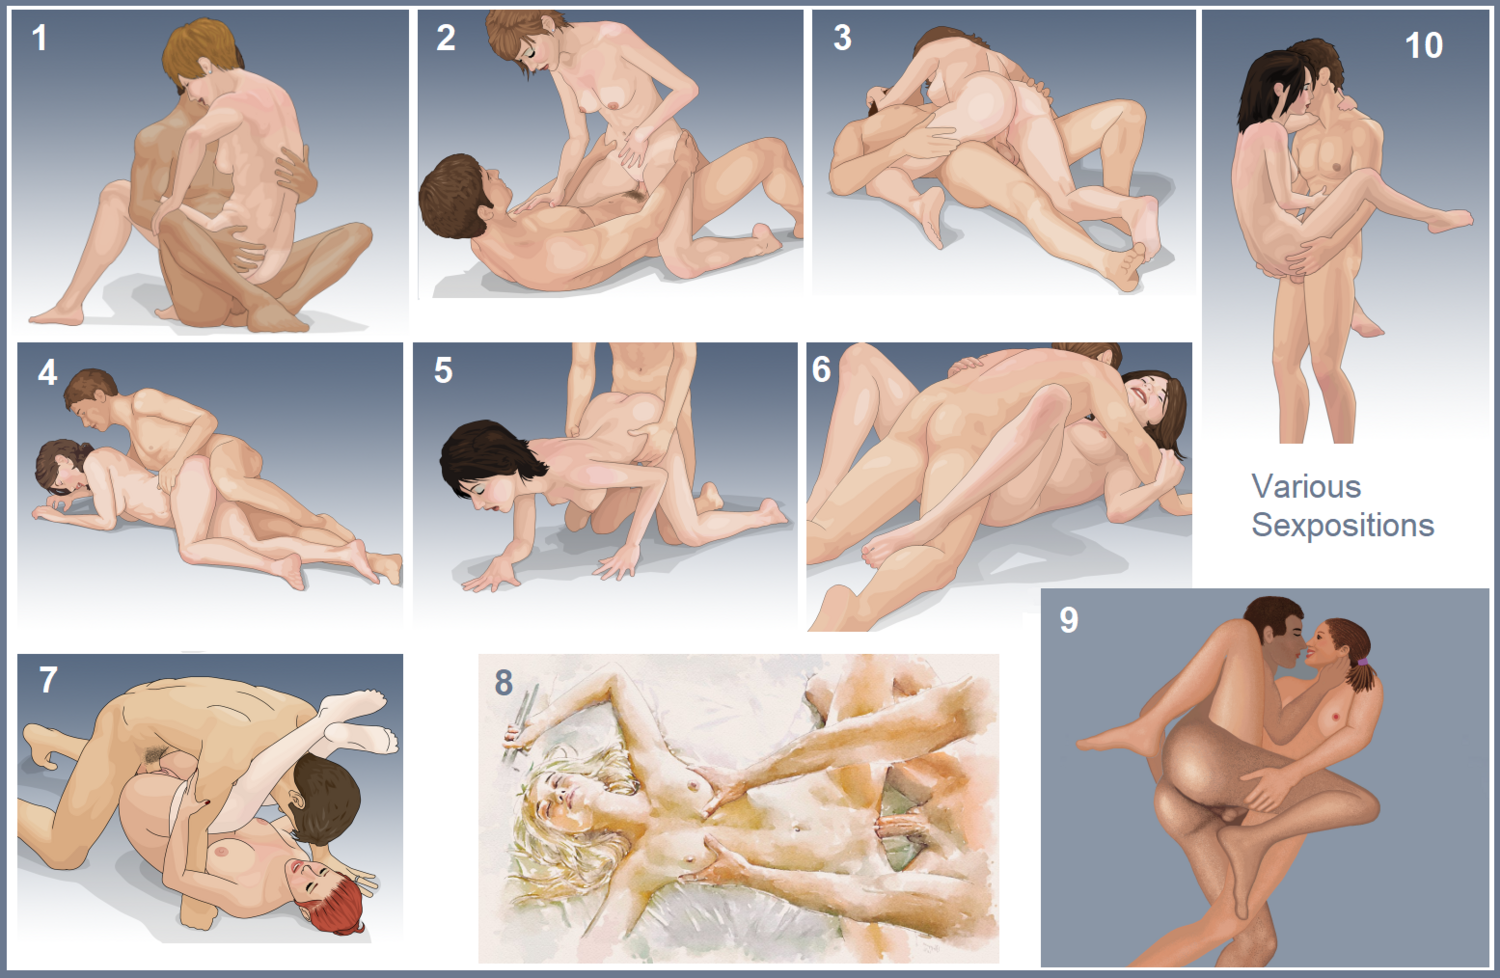 Group Anal Sex Positions - Sex position - Wikiwand